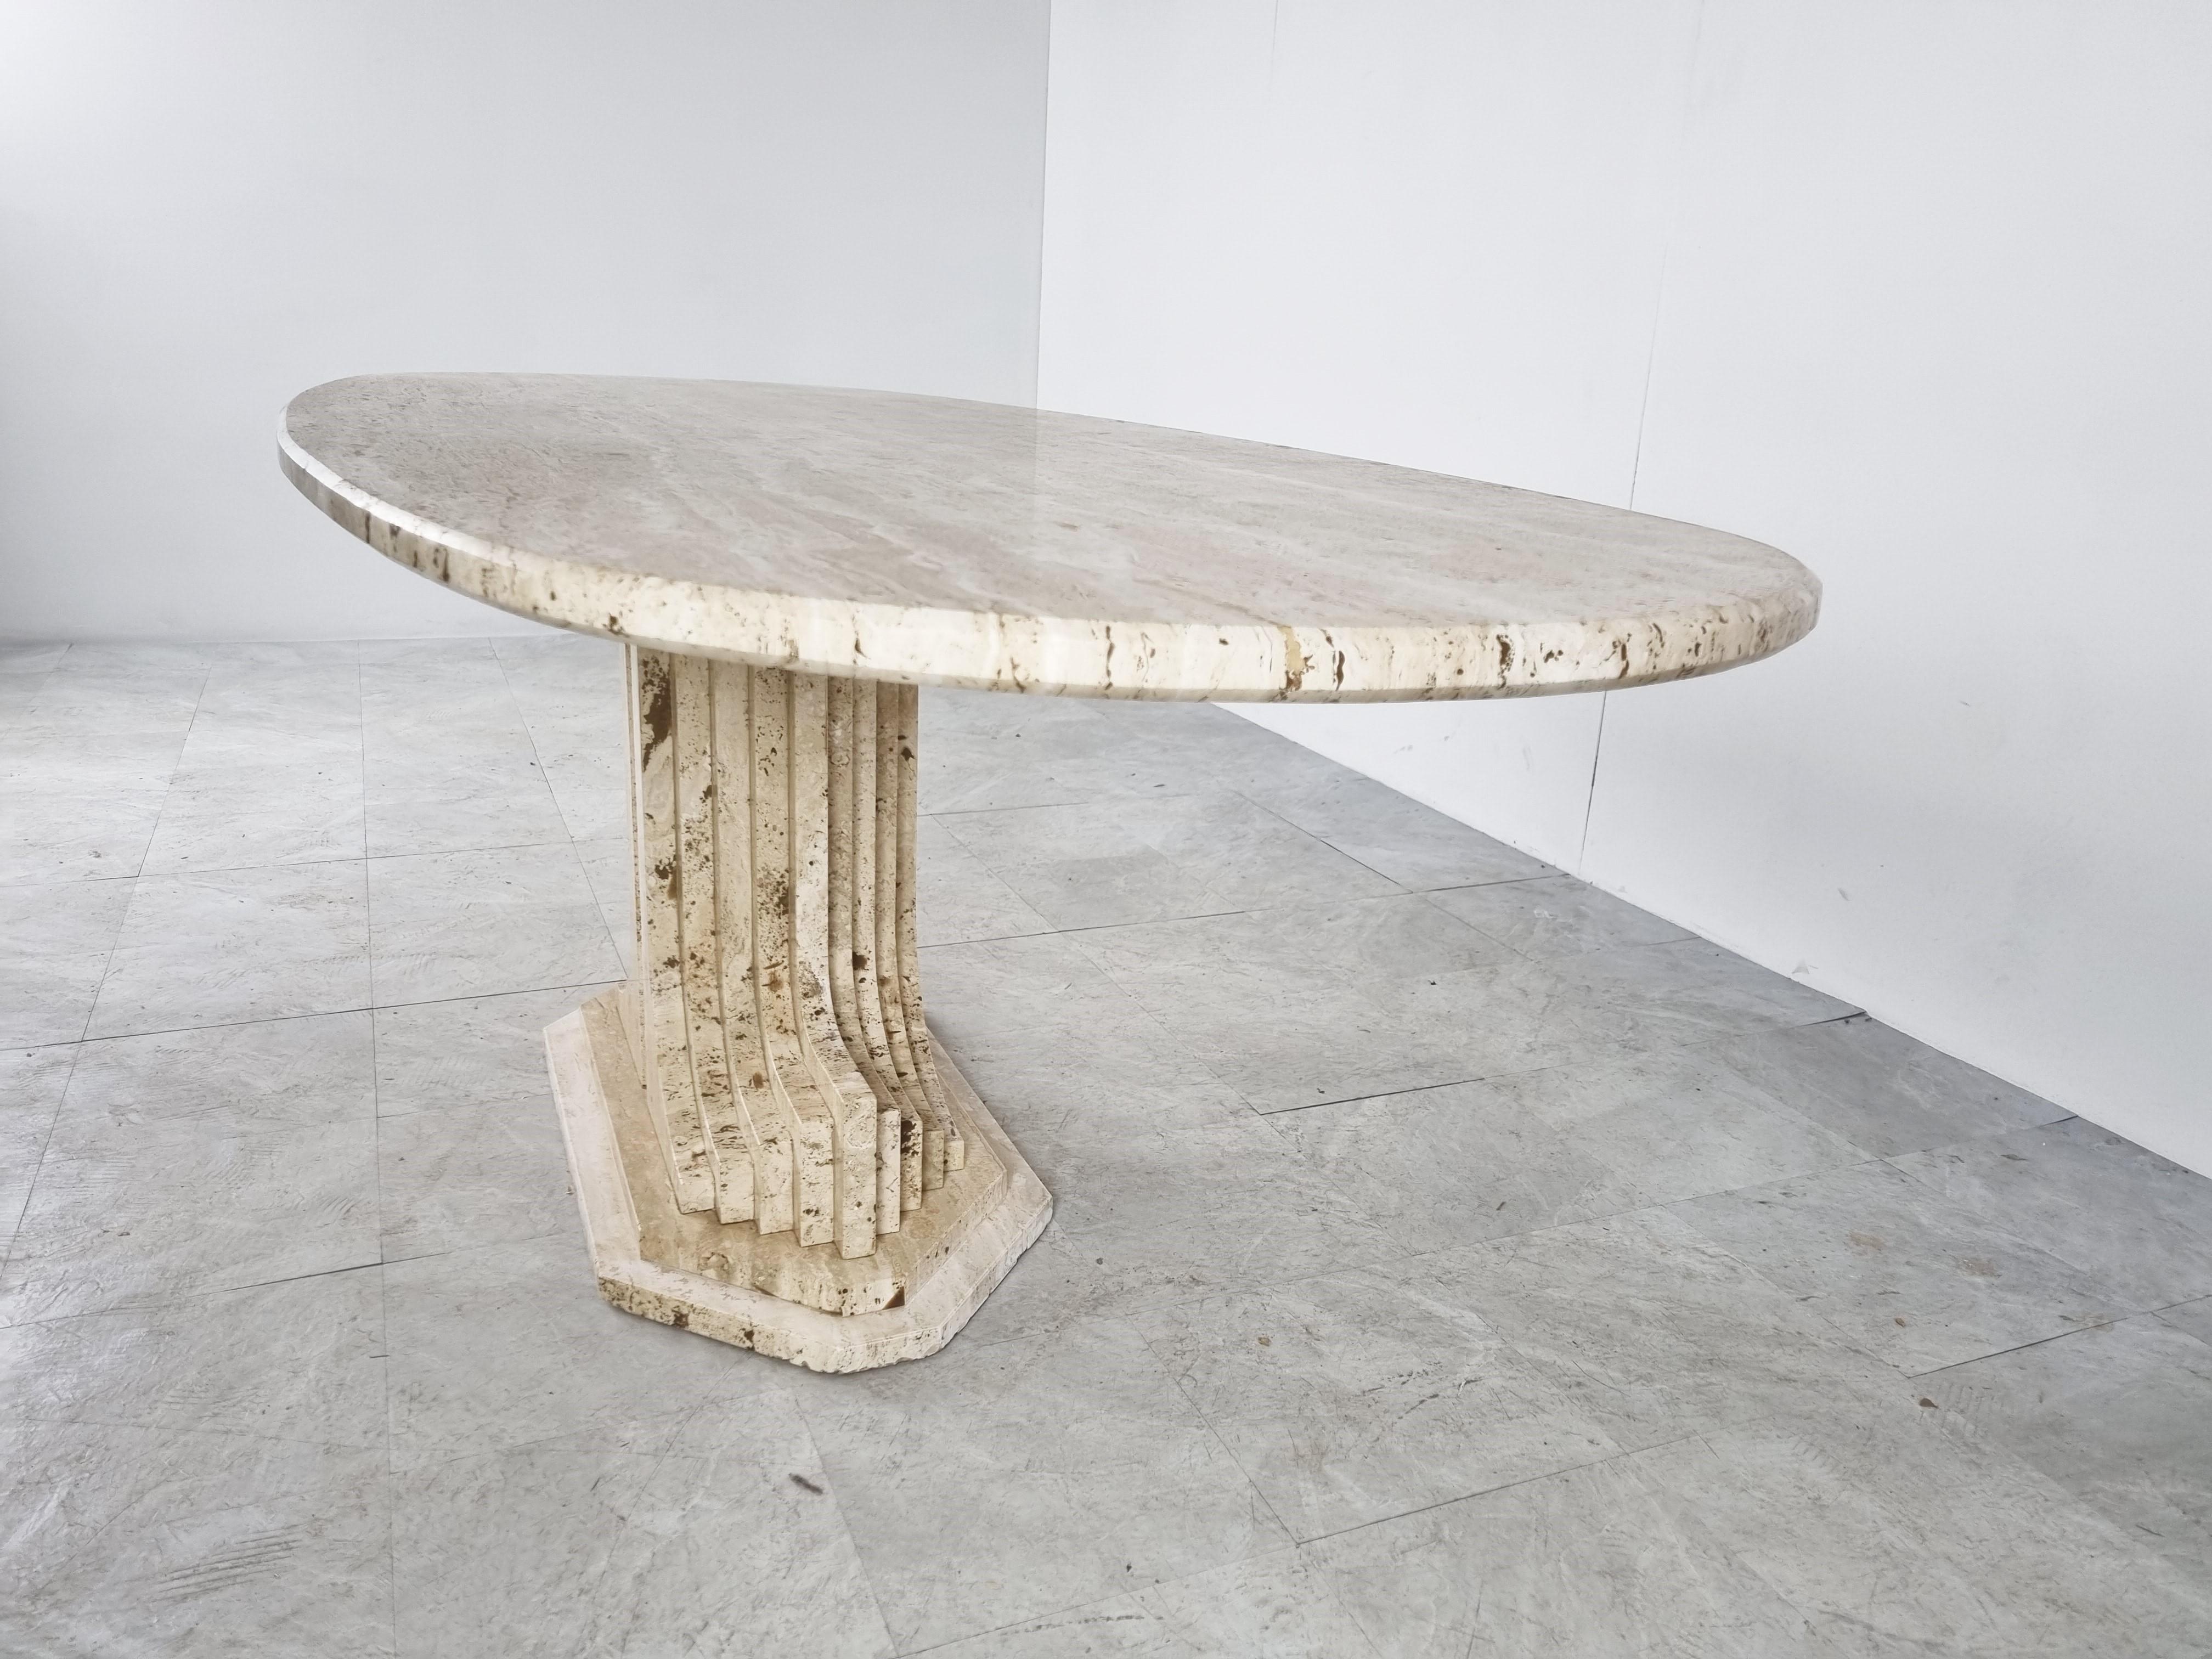 Exquisite travertine dining table in the Style of Carlo Scarpa.

Beautiful architectural piece made of solid travertine with an oval top.

Timeless design.

Good condition

1970s - Italy

Height: 75cm/29.52